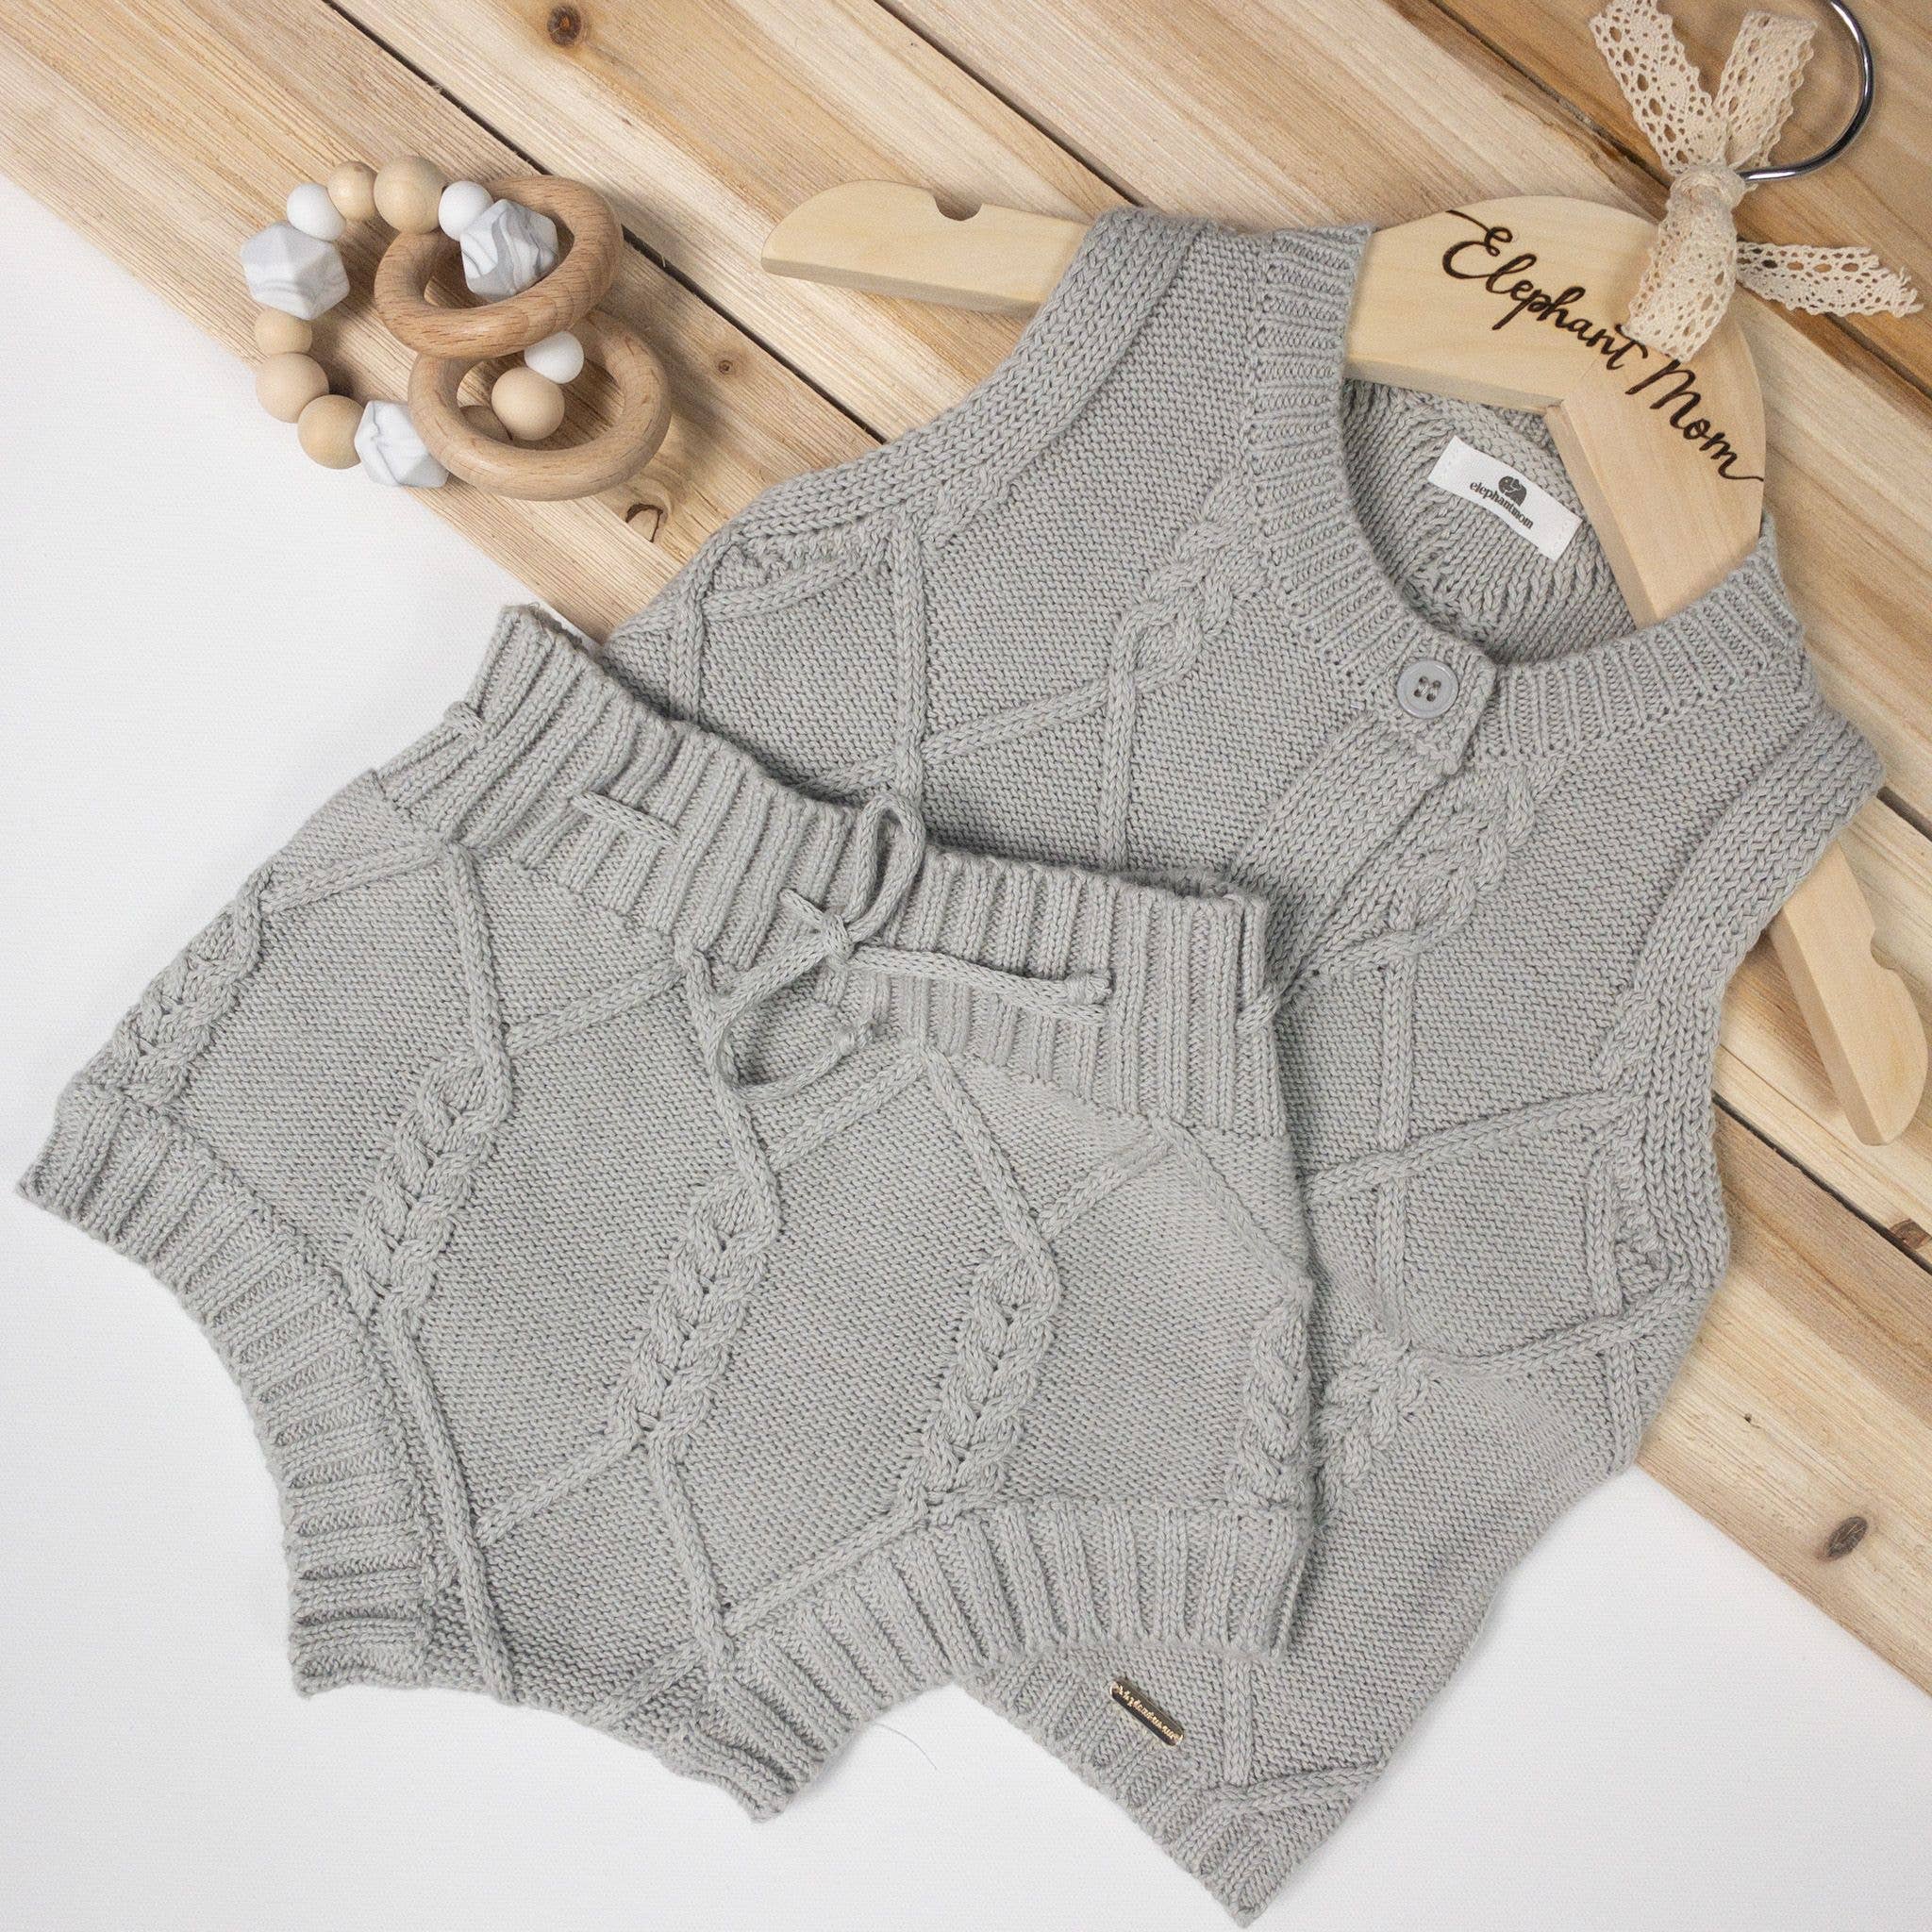 Chloe Vest and Bloomer Unisex Total outfit: 0-6 M / Light Grey